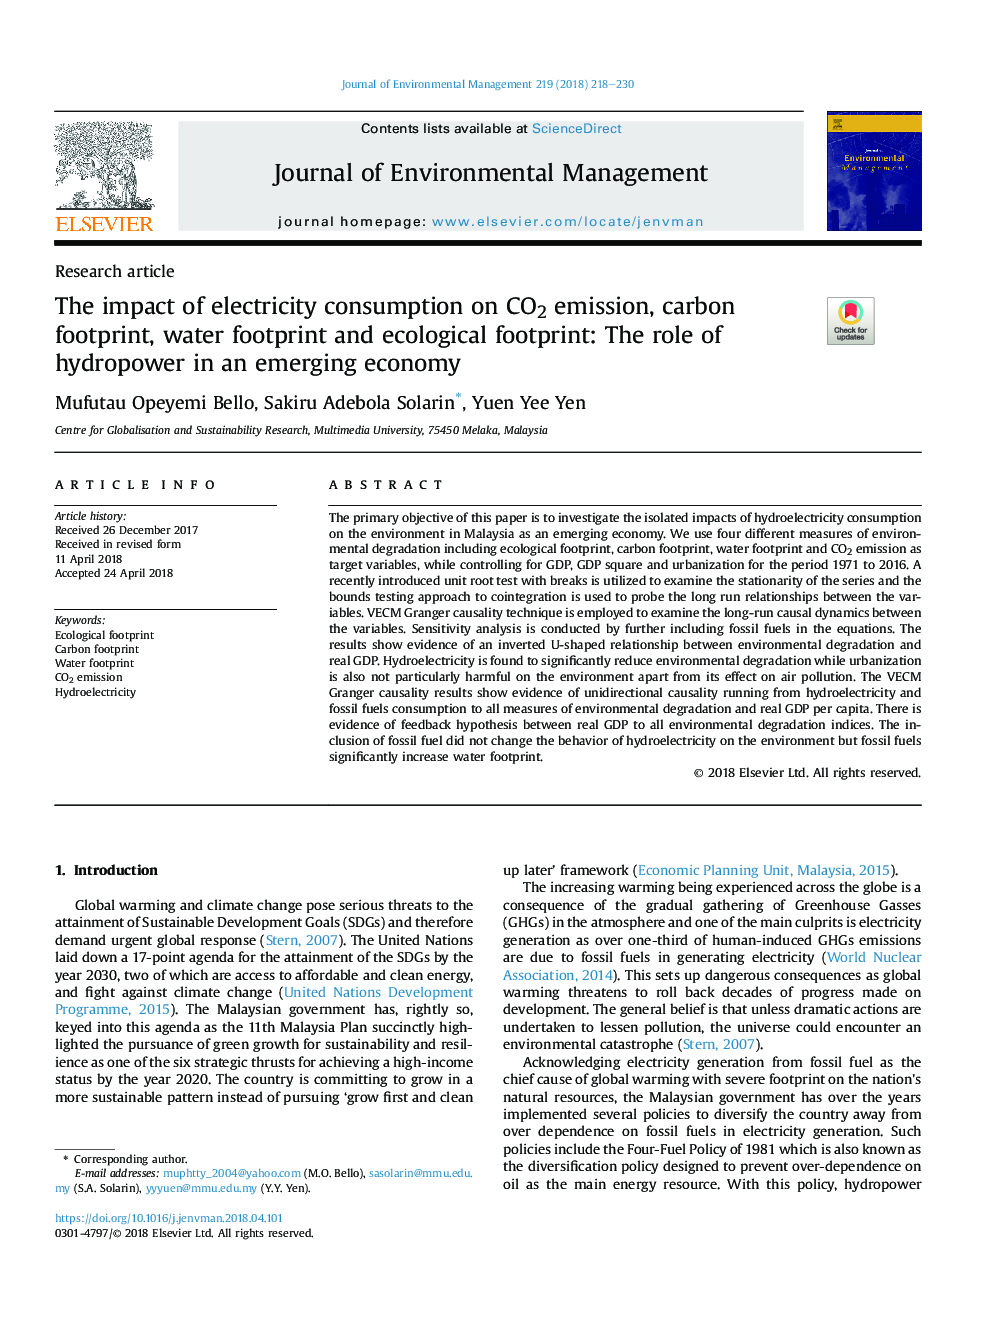 The impact of electricity consumption on CO2 emission, carbon footprint, water footprint and ecological footprint: The role of hydropower in an emerging economy